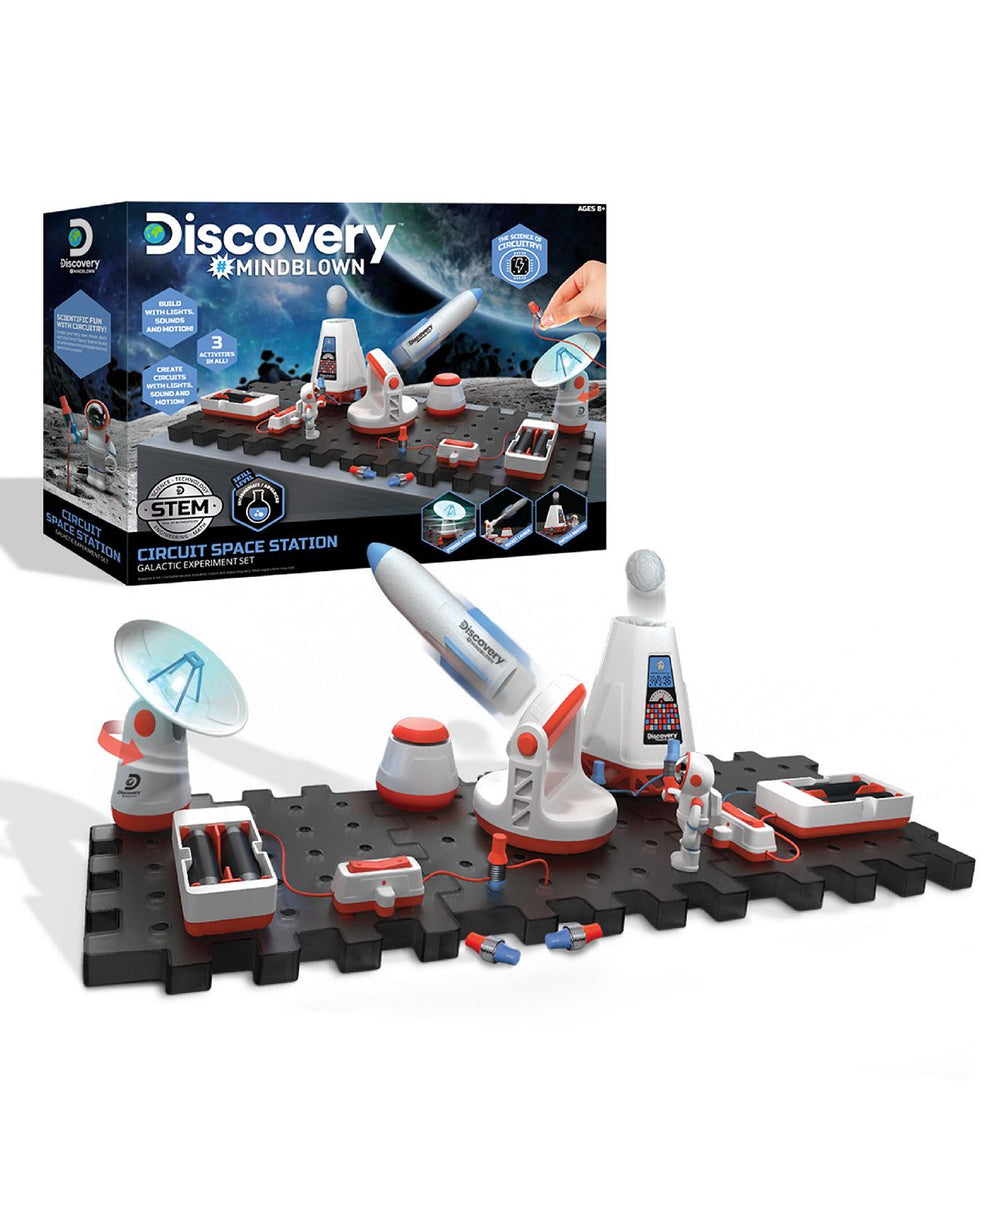 Discovery #MINDBLOWN Galactic Circuit Space Station Experiment Set